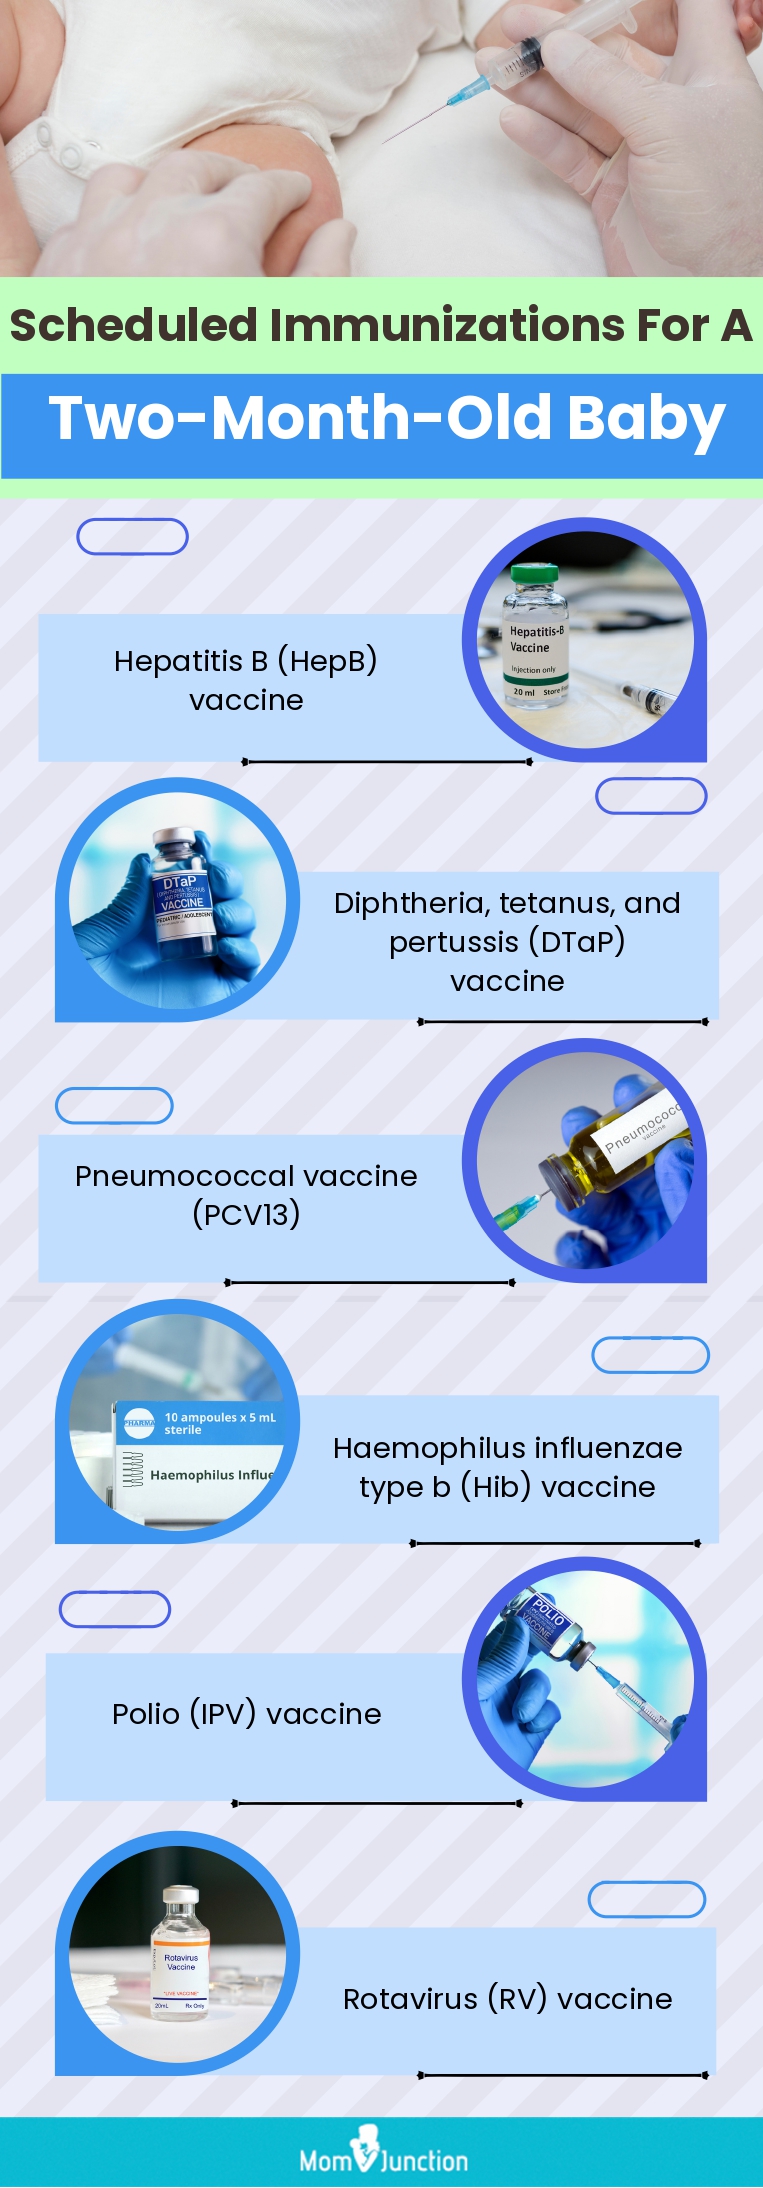 scheduled immunizations for a two month old baby (infographic)